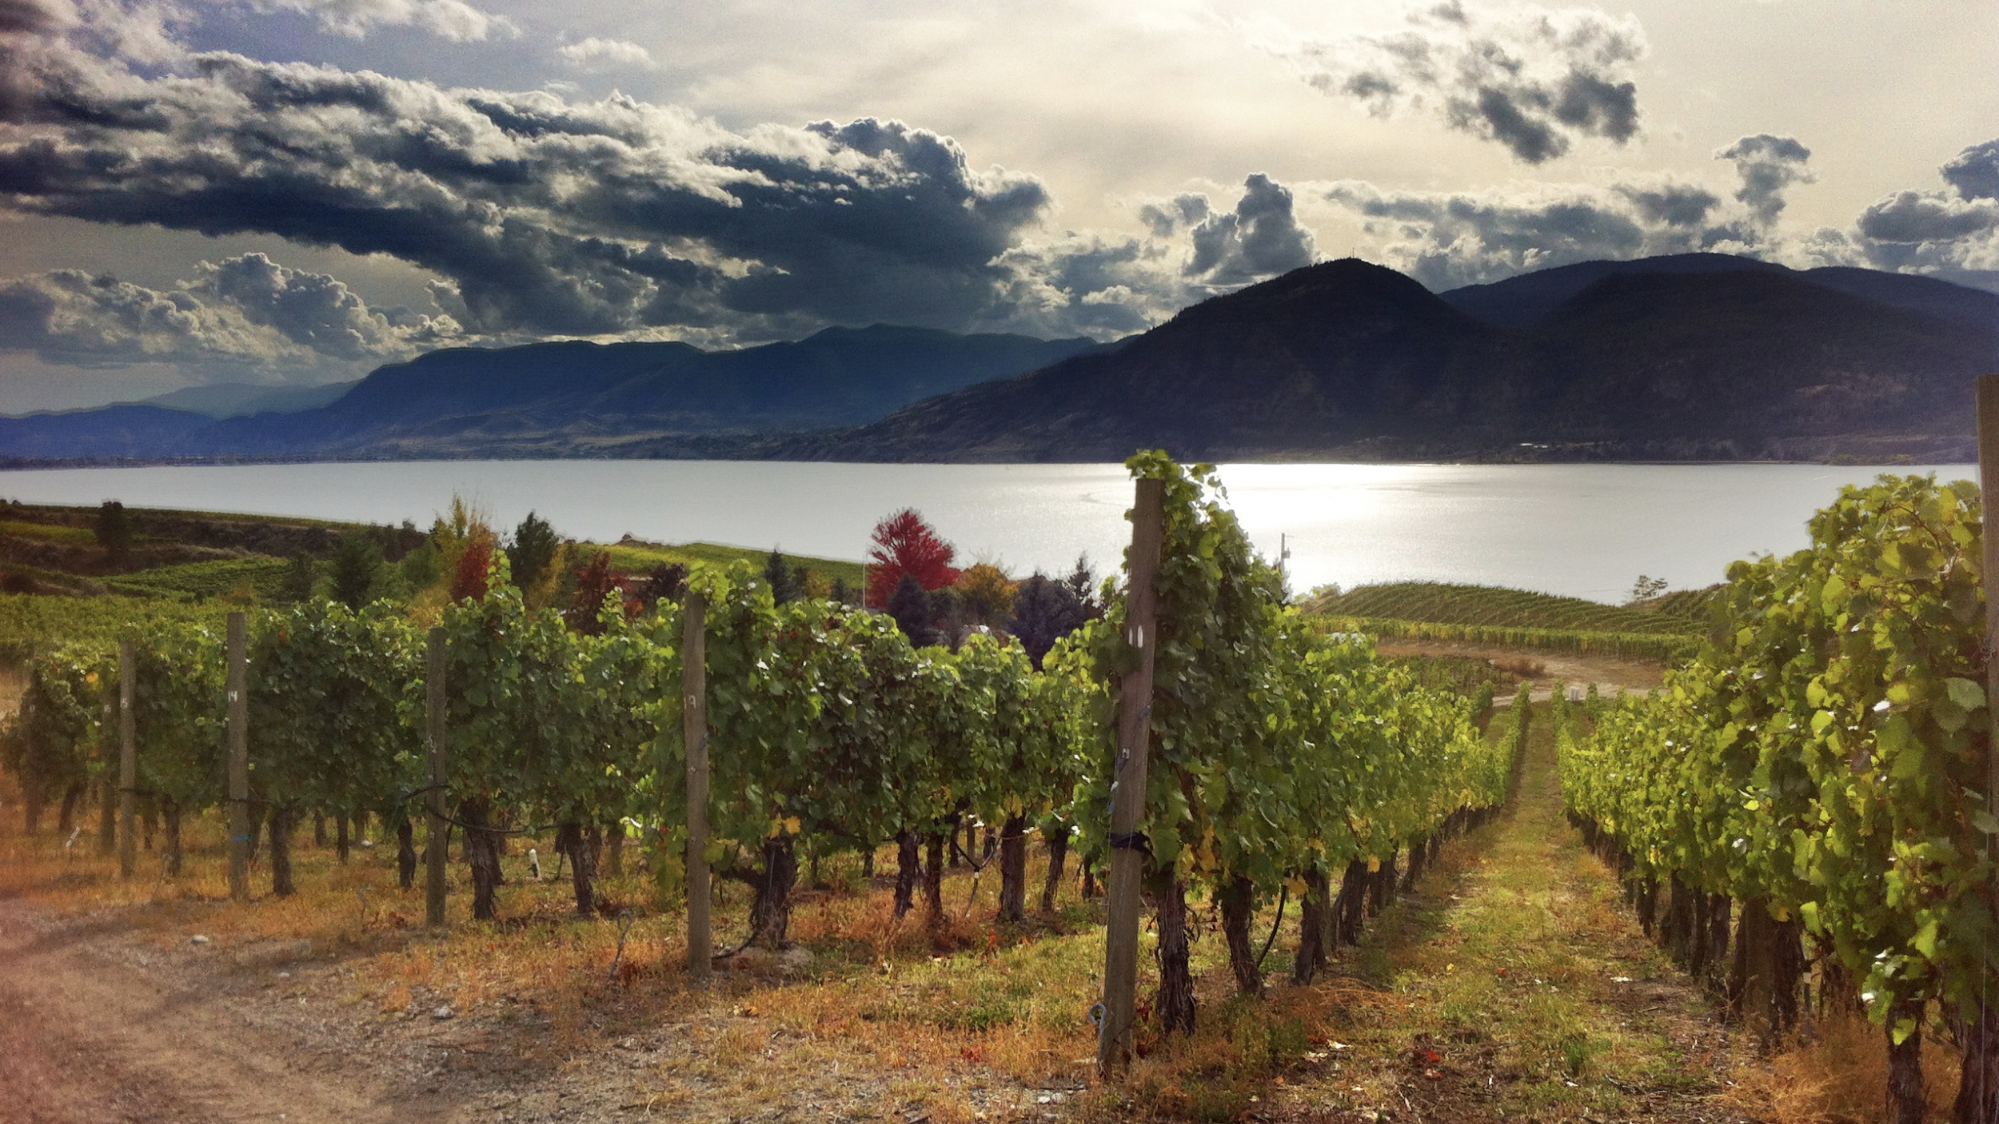 Photo by: Travel Penticton; Get exclusive offers on wine tours when you book with Penticton Lakeside Resort & Conference Centre.